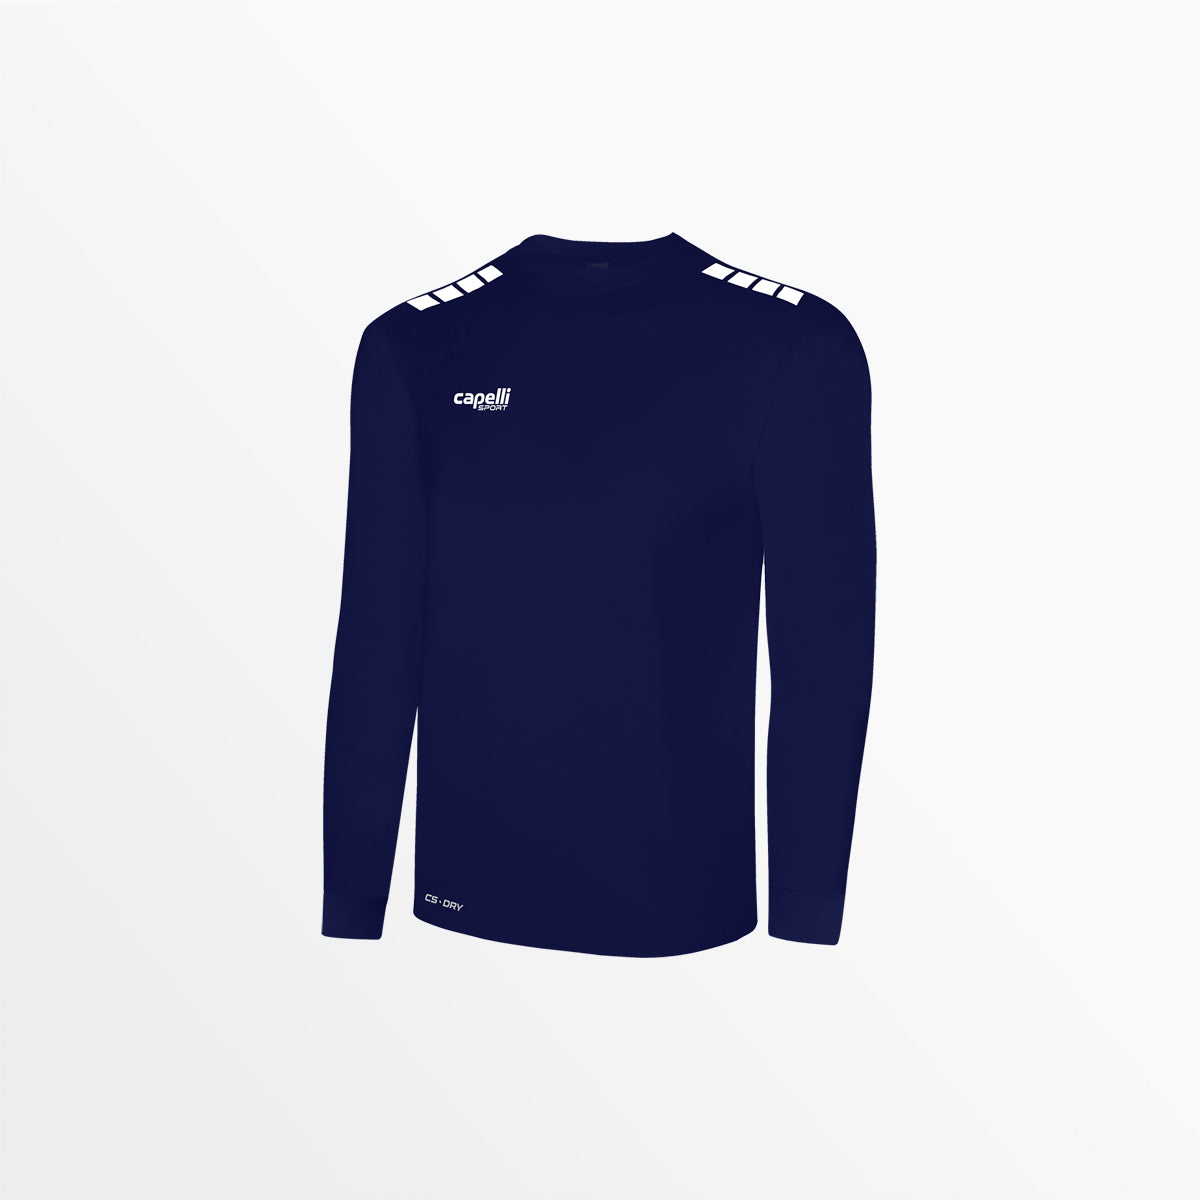 YOUTH TEAM LONG SLEEVE JERSEY